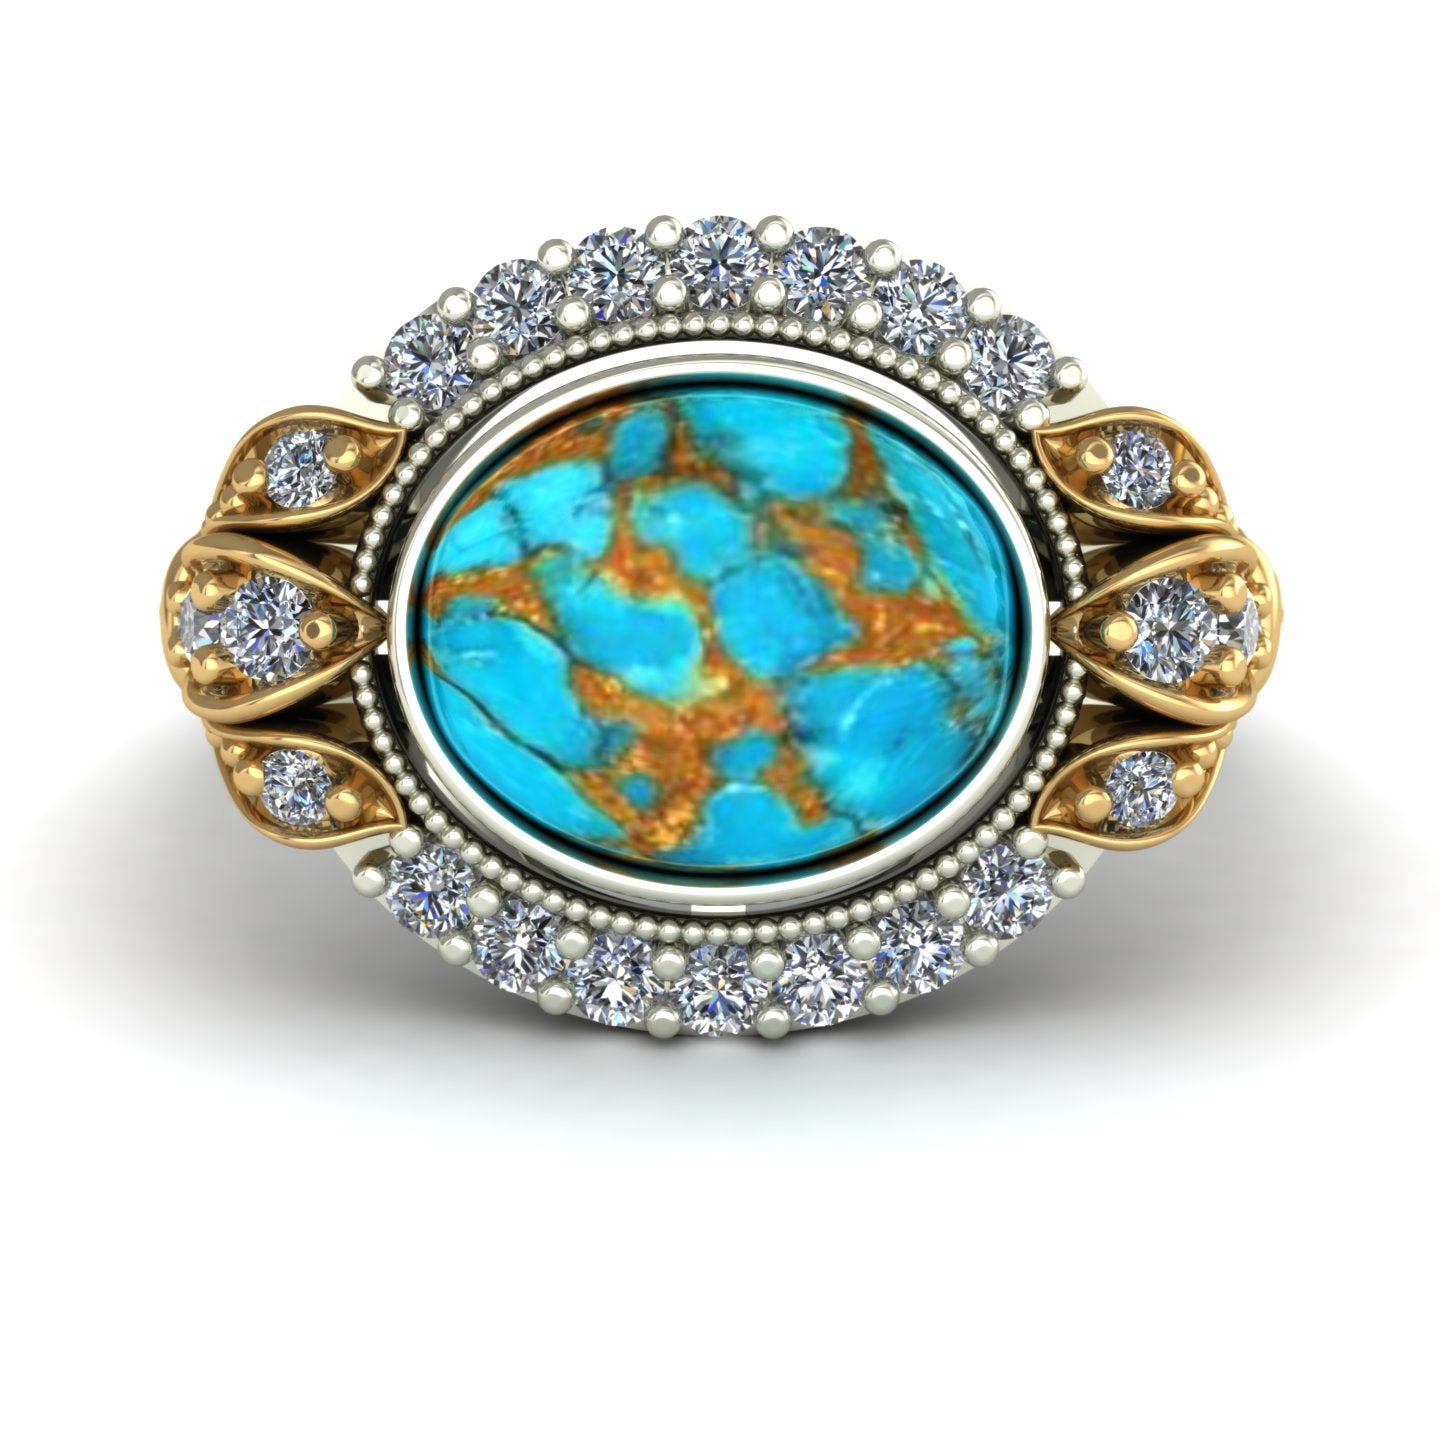 bezel set oval turquoise two tone ring in 14k yellow and white gold - Charles Babb Designs - top view